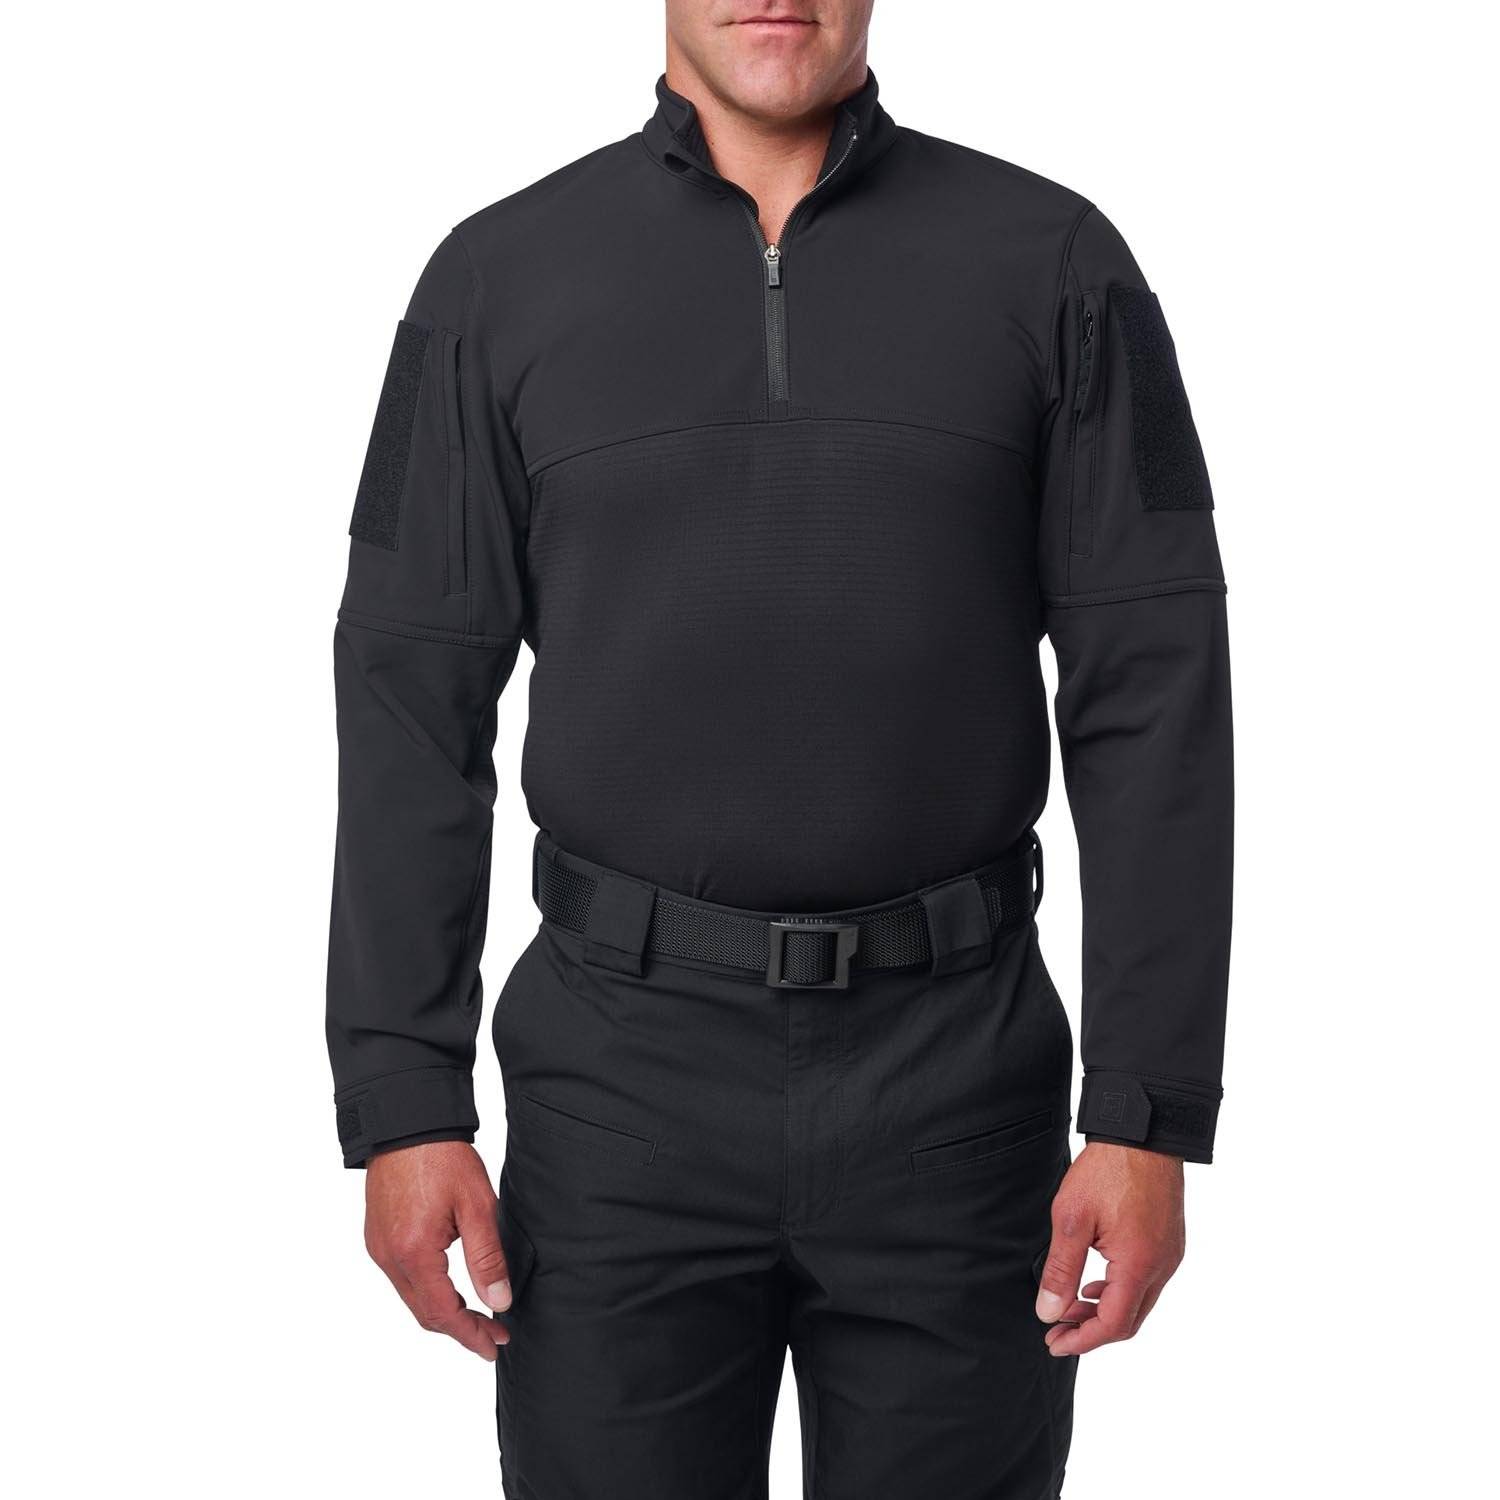 5.11 TACTICAL COLD WEATHER RAPID OPS SHIRT